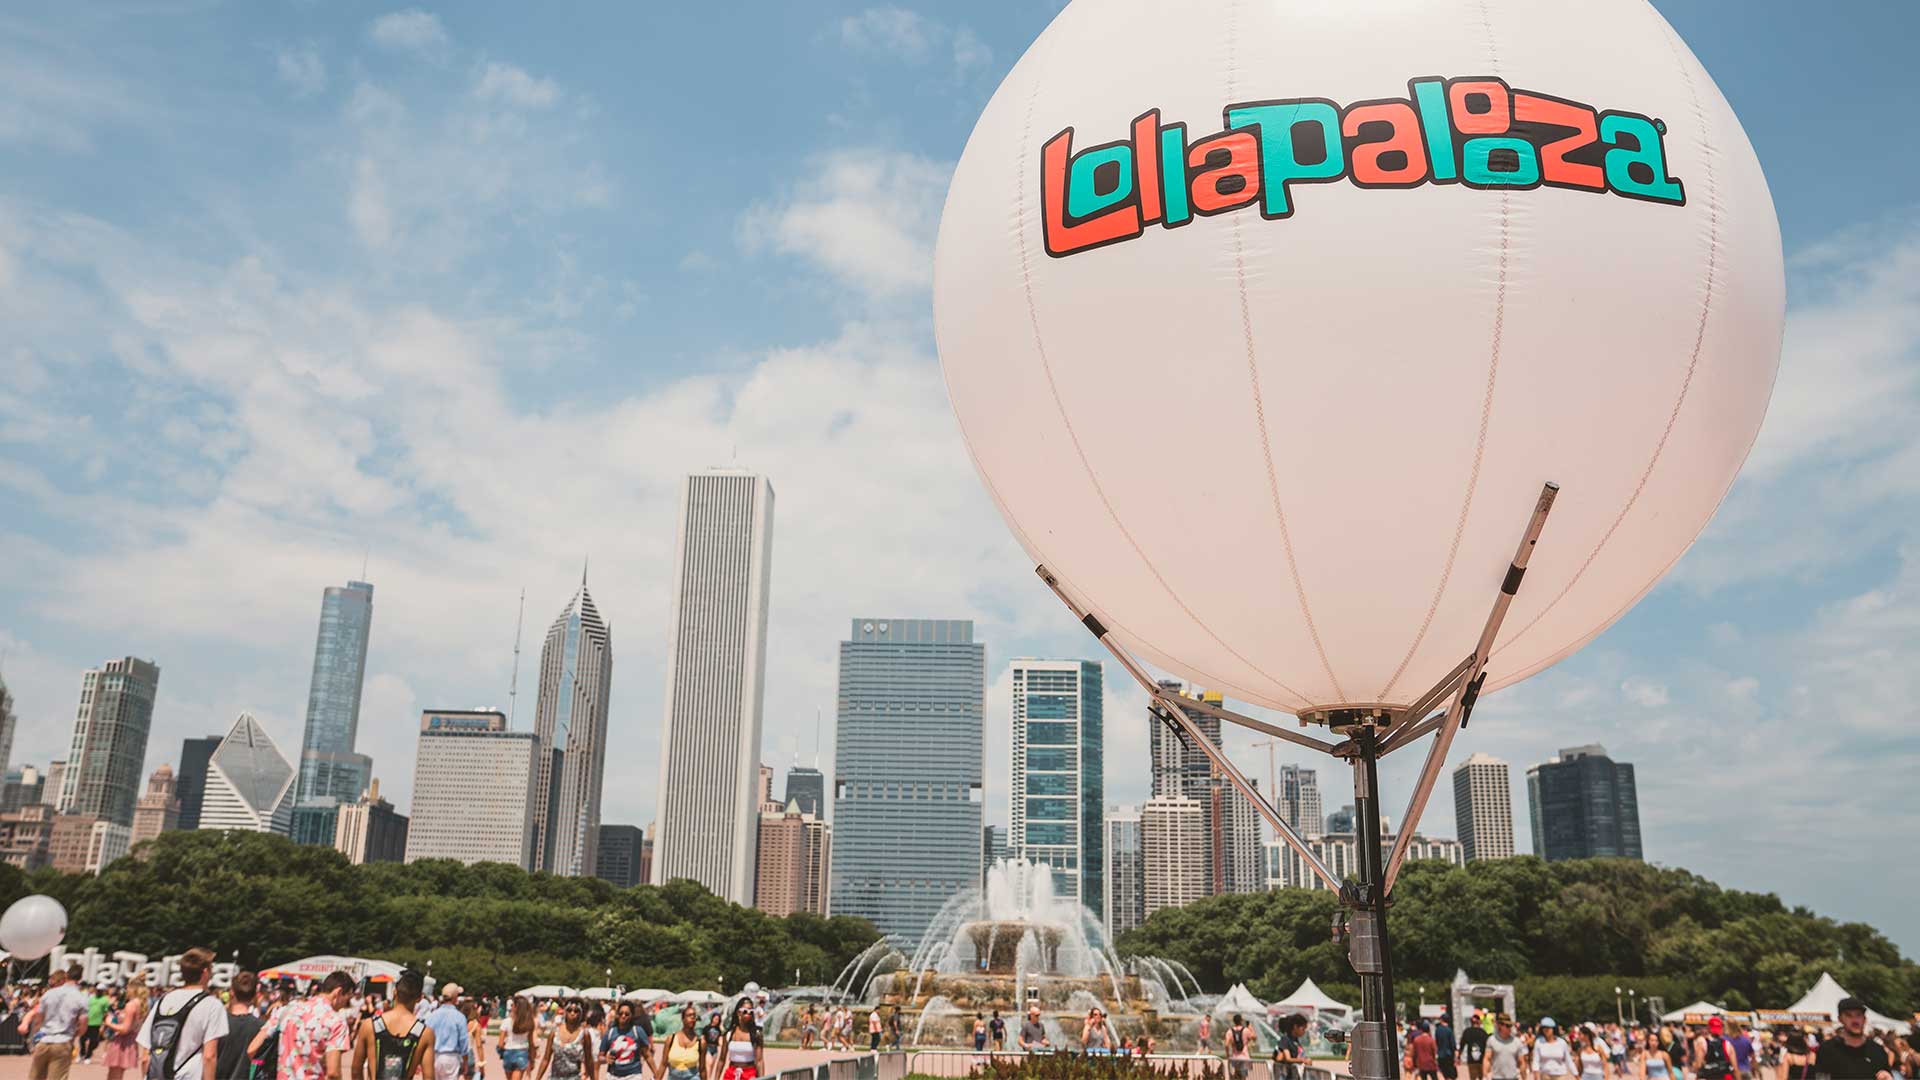 Your Guide to the Lollapalooza Music Festival in Chicago